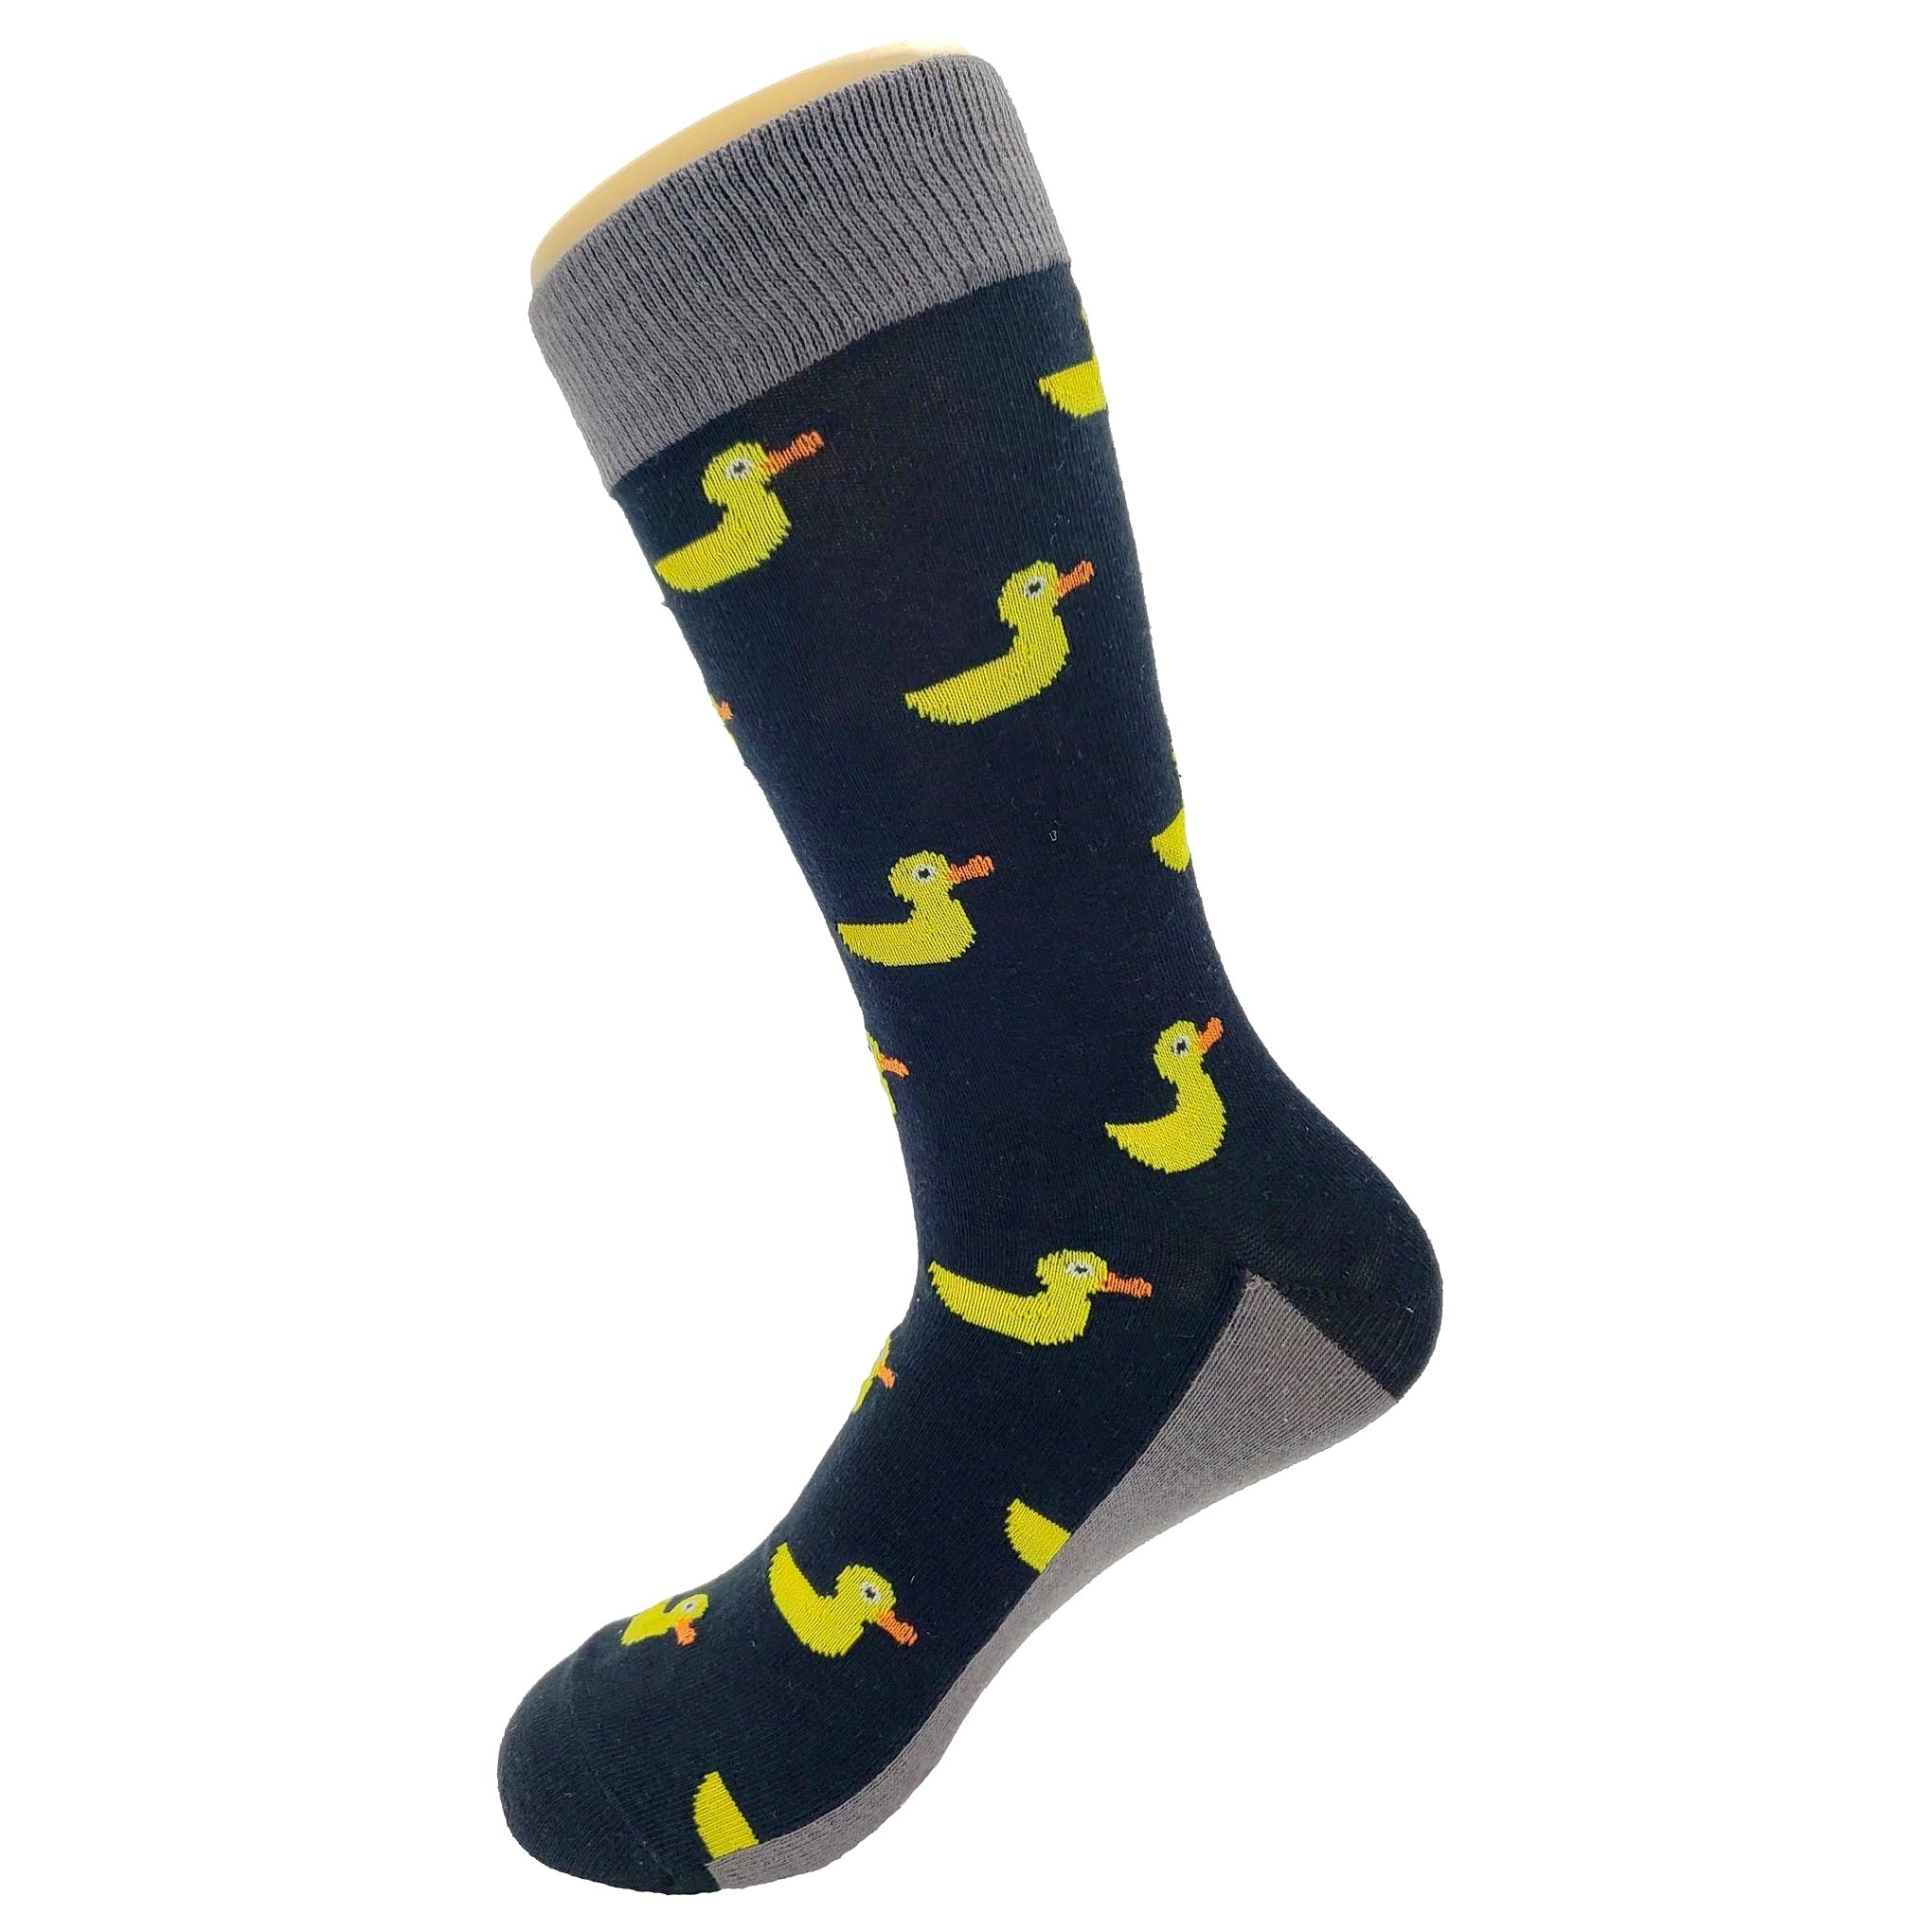 Yellow Duck Pattern Socks from the Sock Panda (Adult Large)